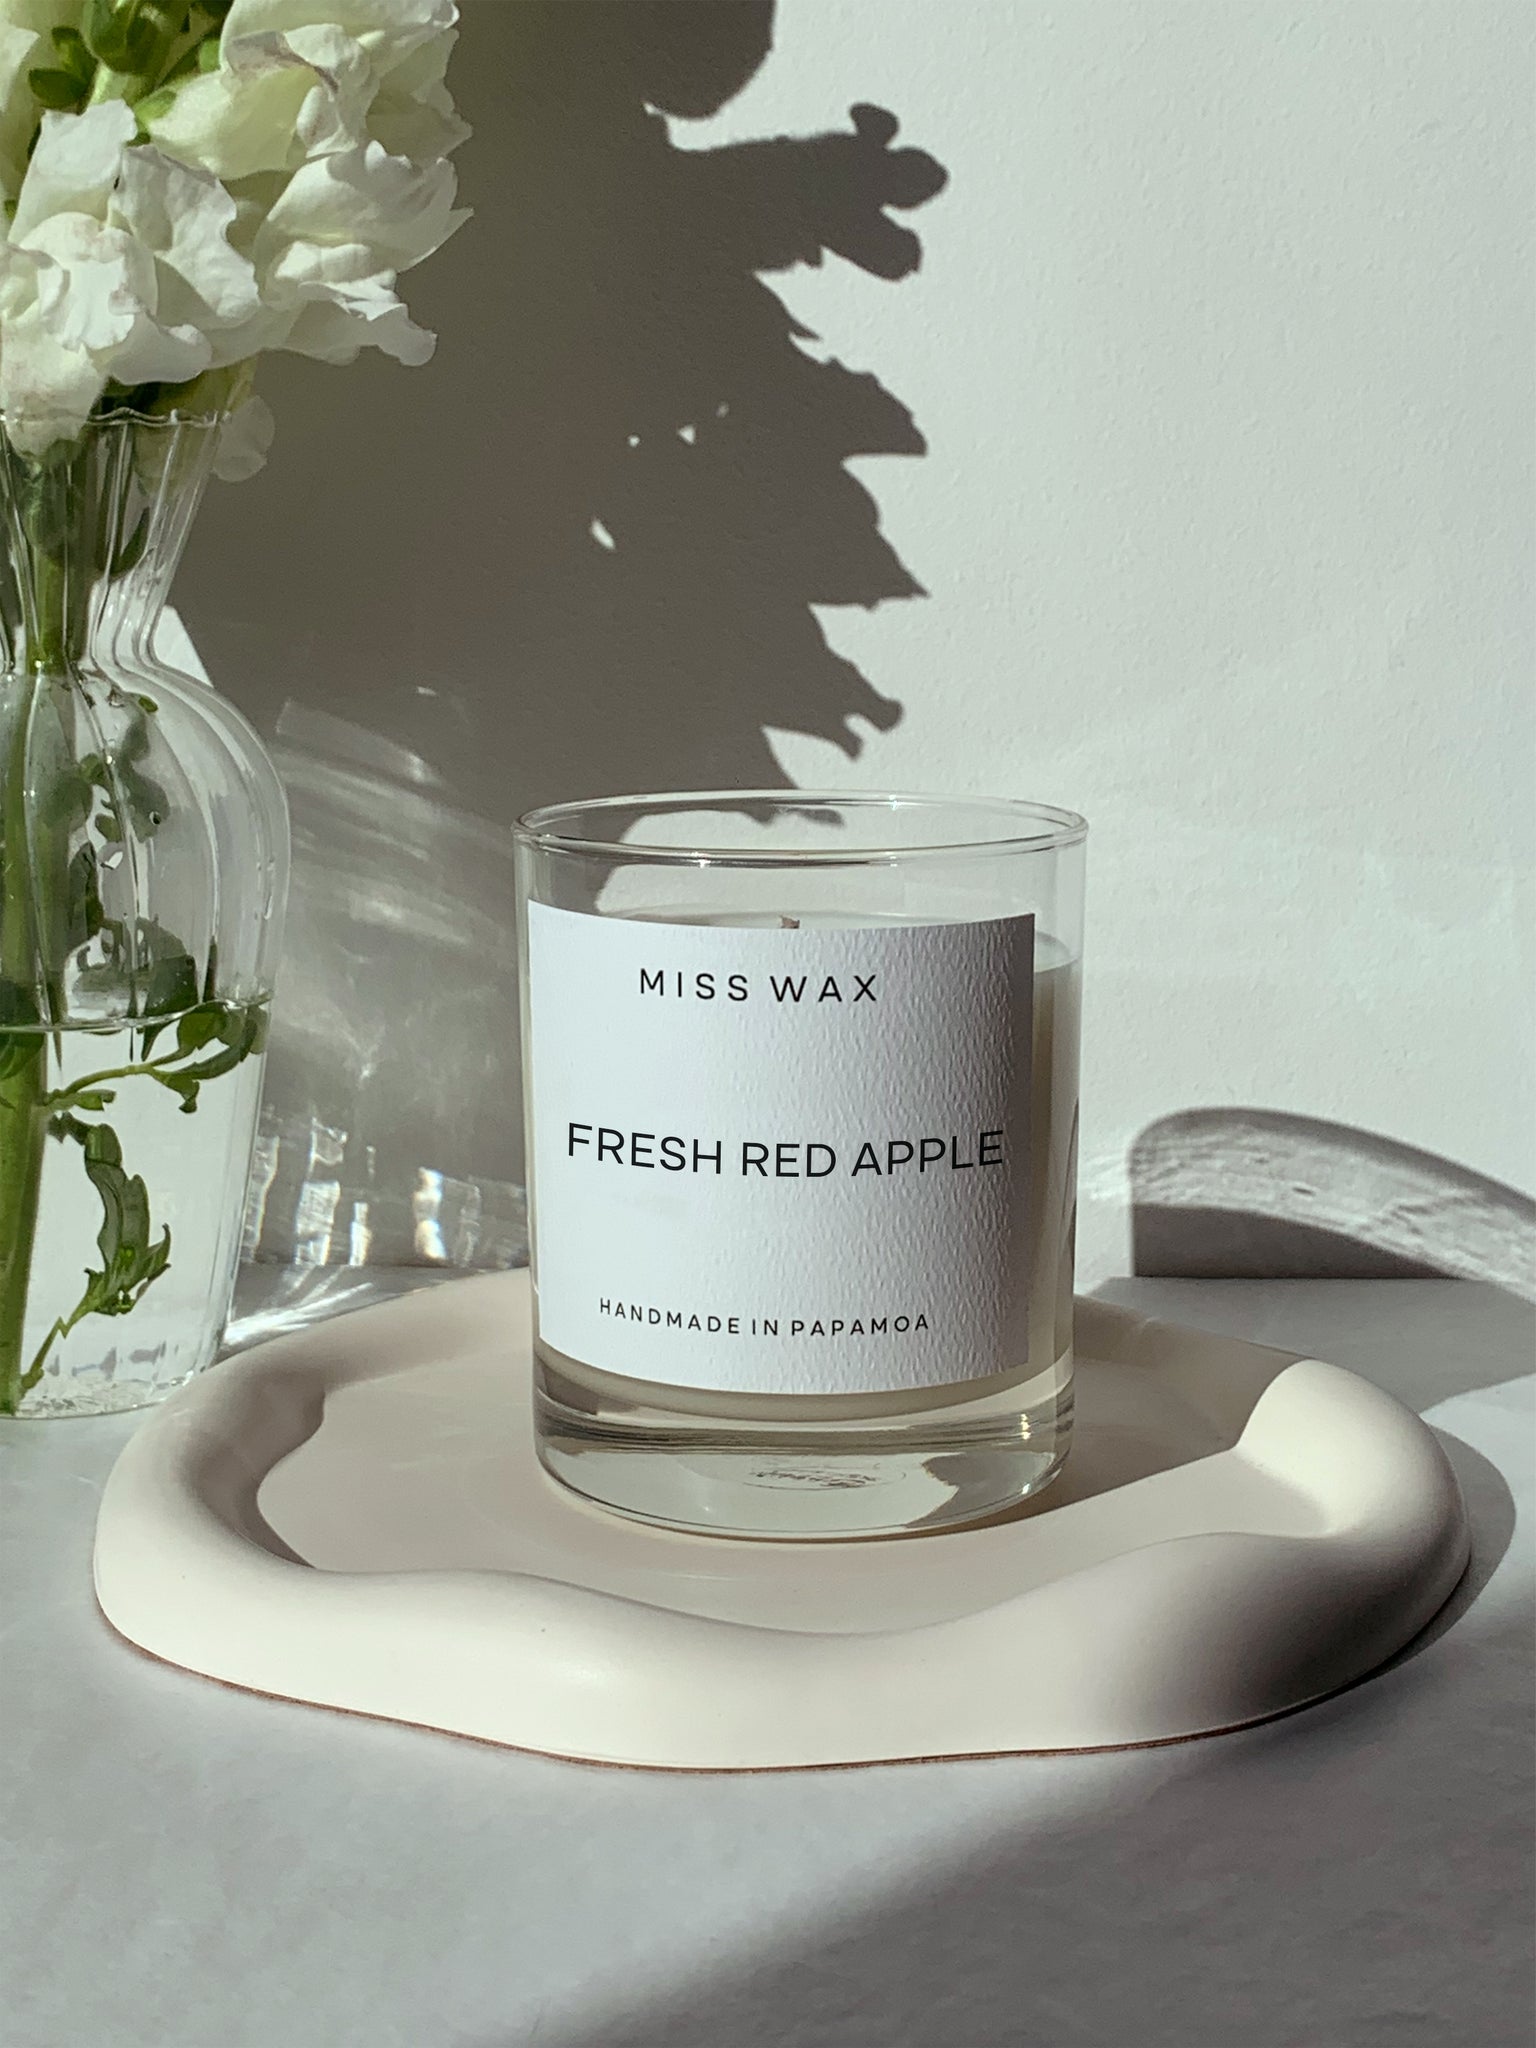 FRESH RED APPLE MINI - SCENT OF THE MONTH